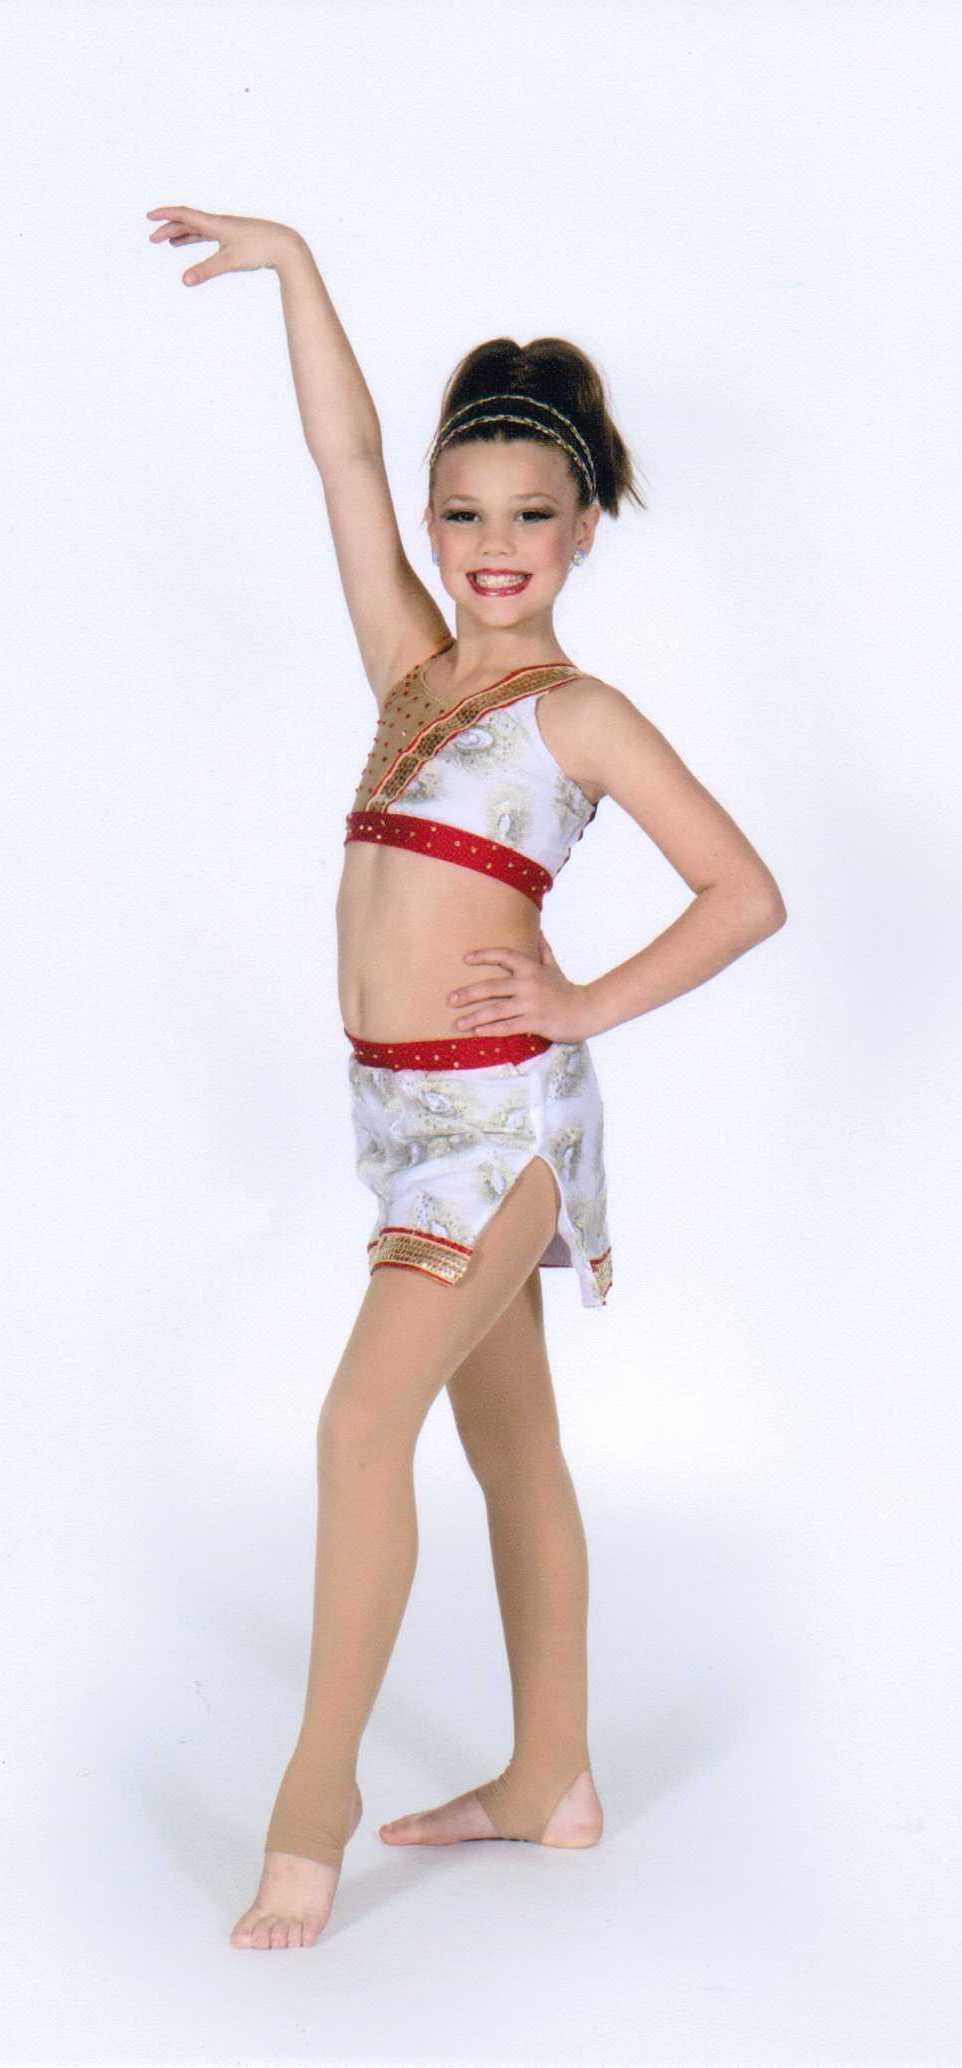 Kalynn's Jazz Outfit Kalynn dances competitively with Jazz, lyrical, tumbling, as well as ballet, tap, some hip hop